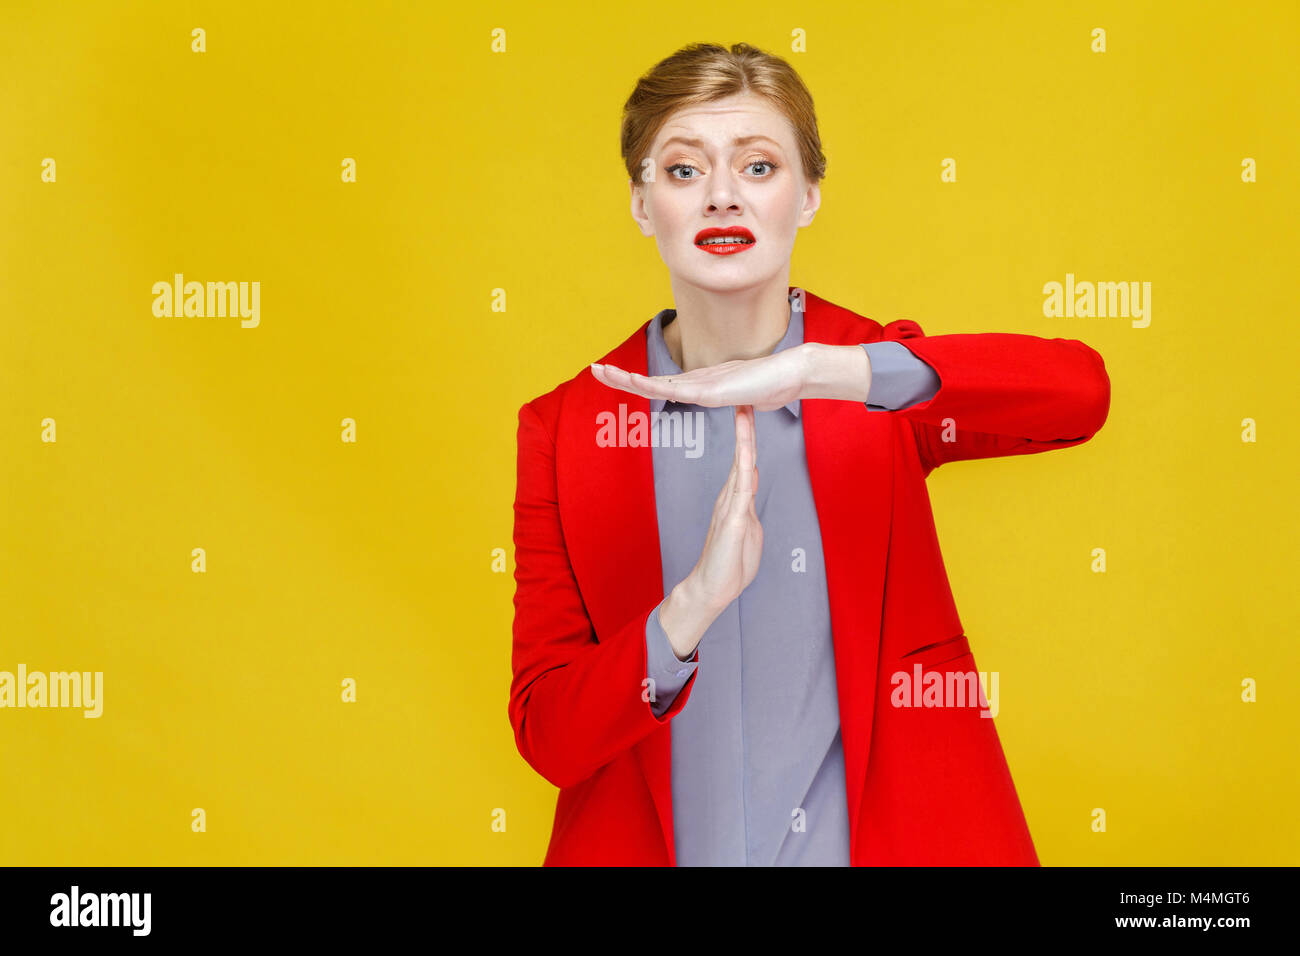 Time out! Unhappy business woman in red suit showing pause sign. Studio shot, isolated on yellow background Stock Photo